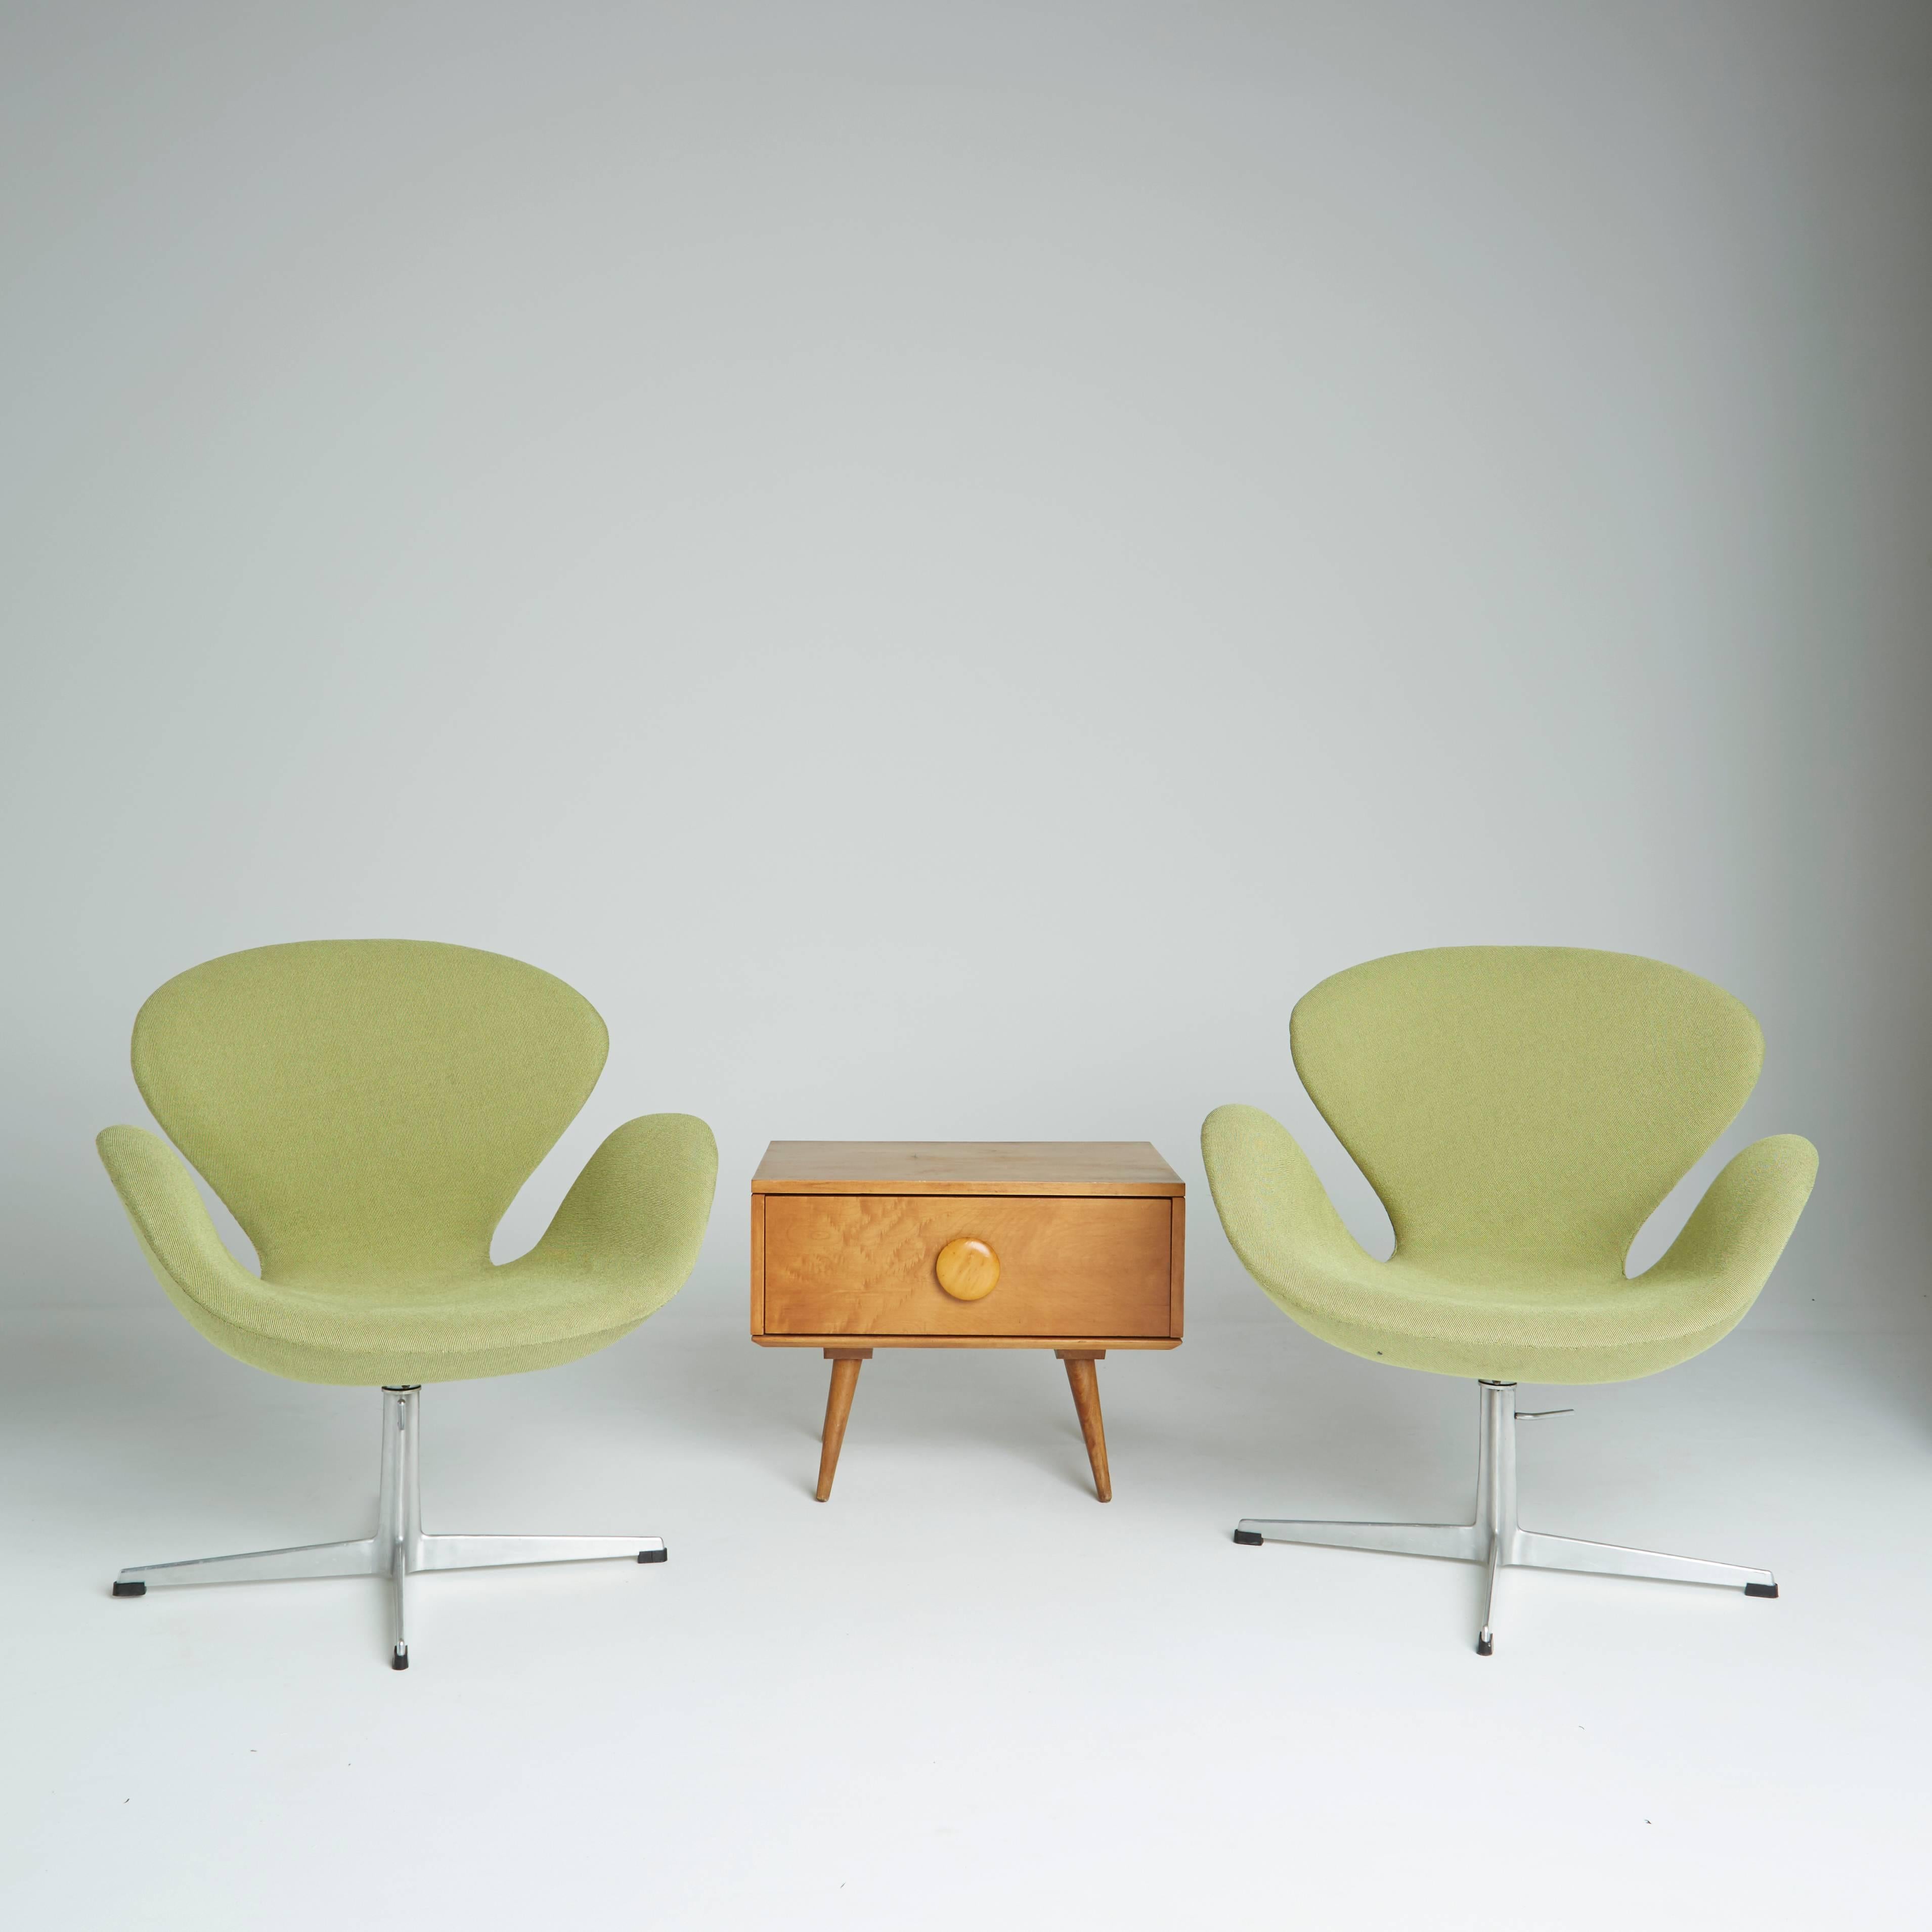 Swan Chairs by Arne Jacobsen for Fritz Hansen, Circa 1964 Production 1